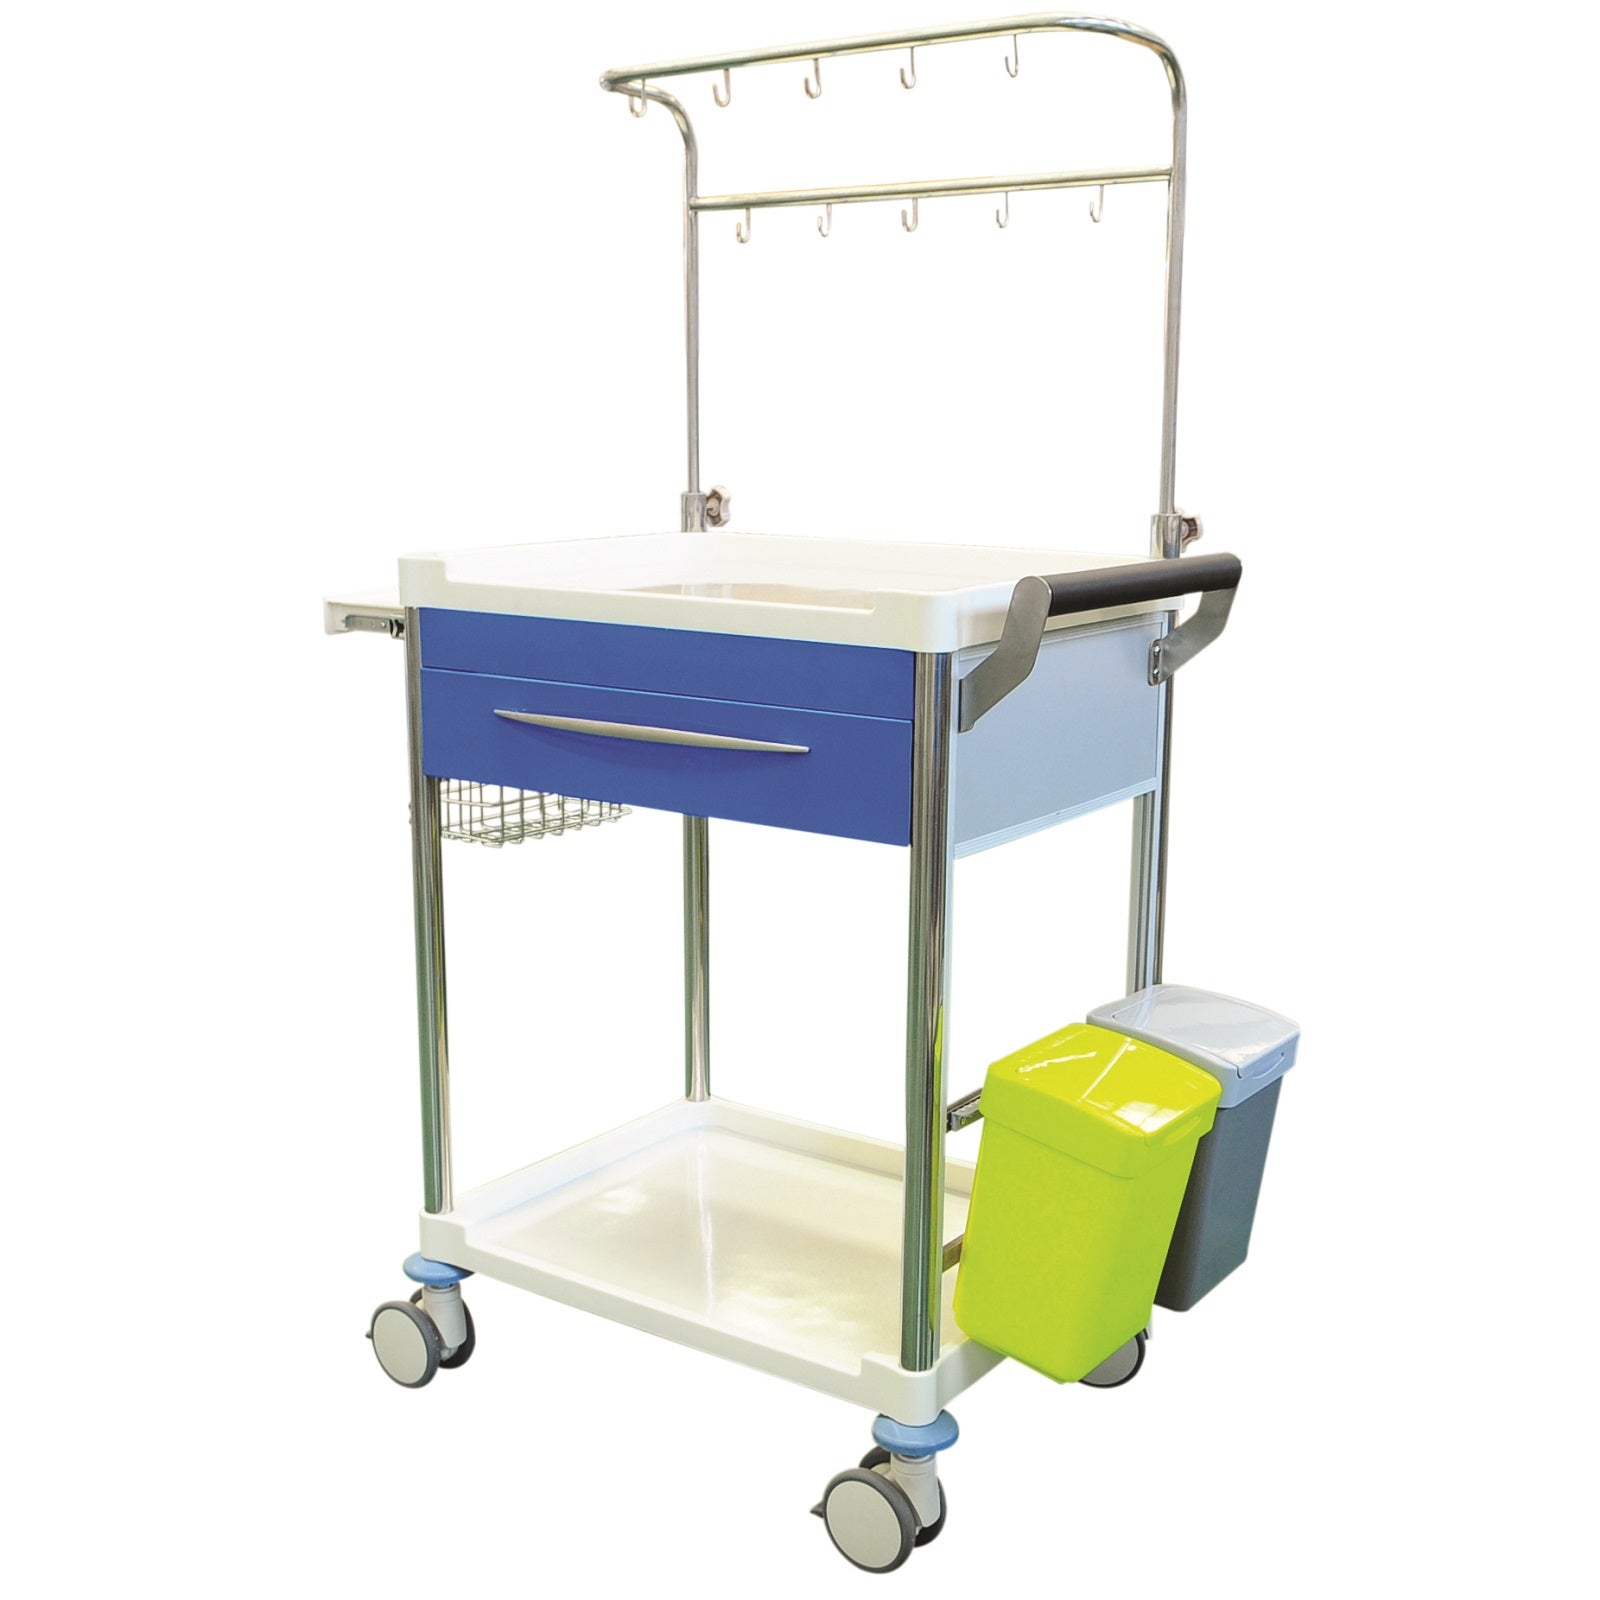 A fully featured infusion trolley including bins, basket &amp; adjustable height IV bag pole.